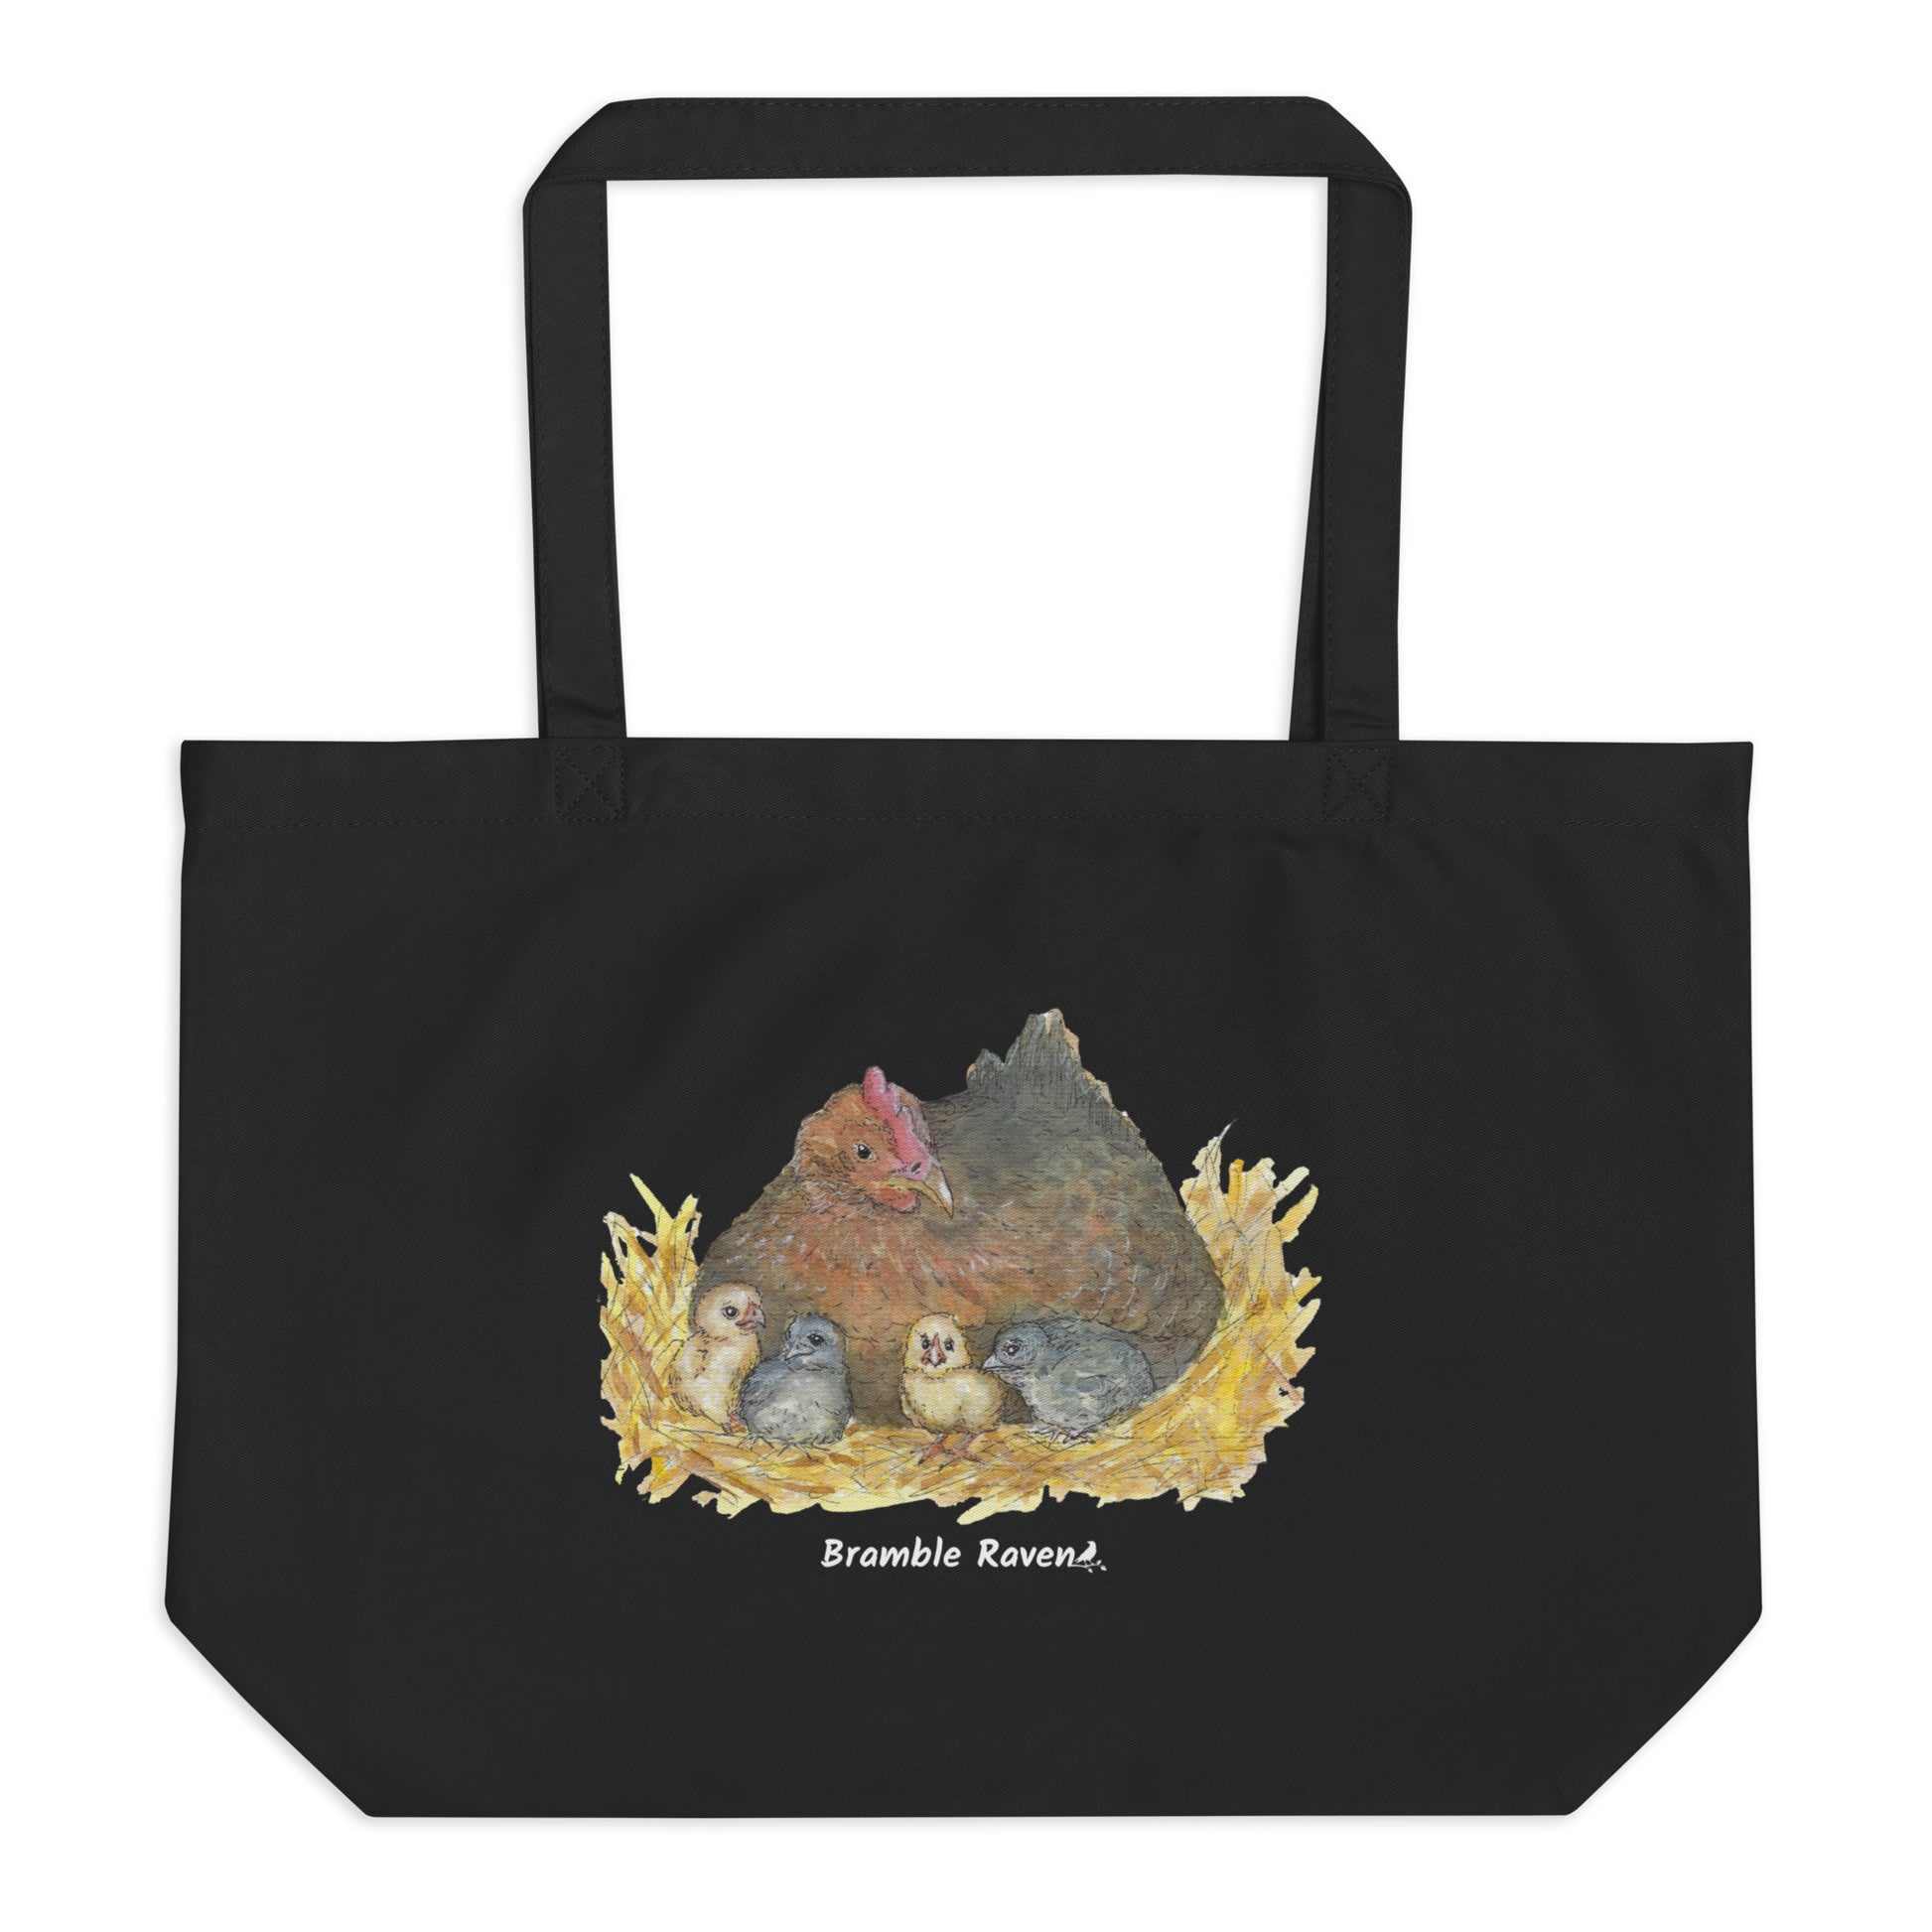 Large black organic cotton tote bag. Has a watercolor mother hand and chicks print. Holds up to 30 pounds.